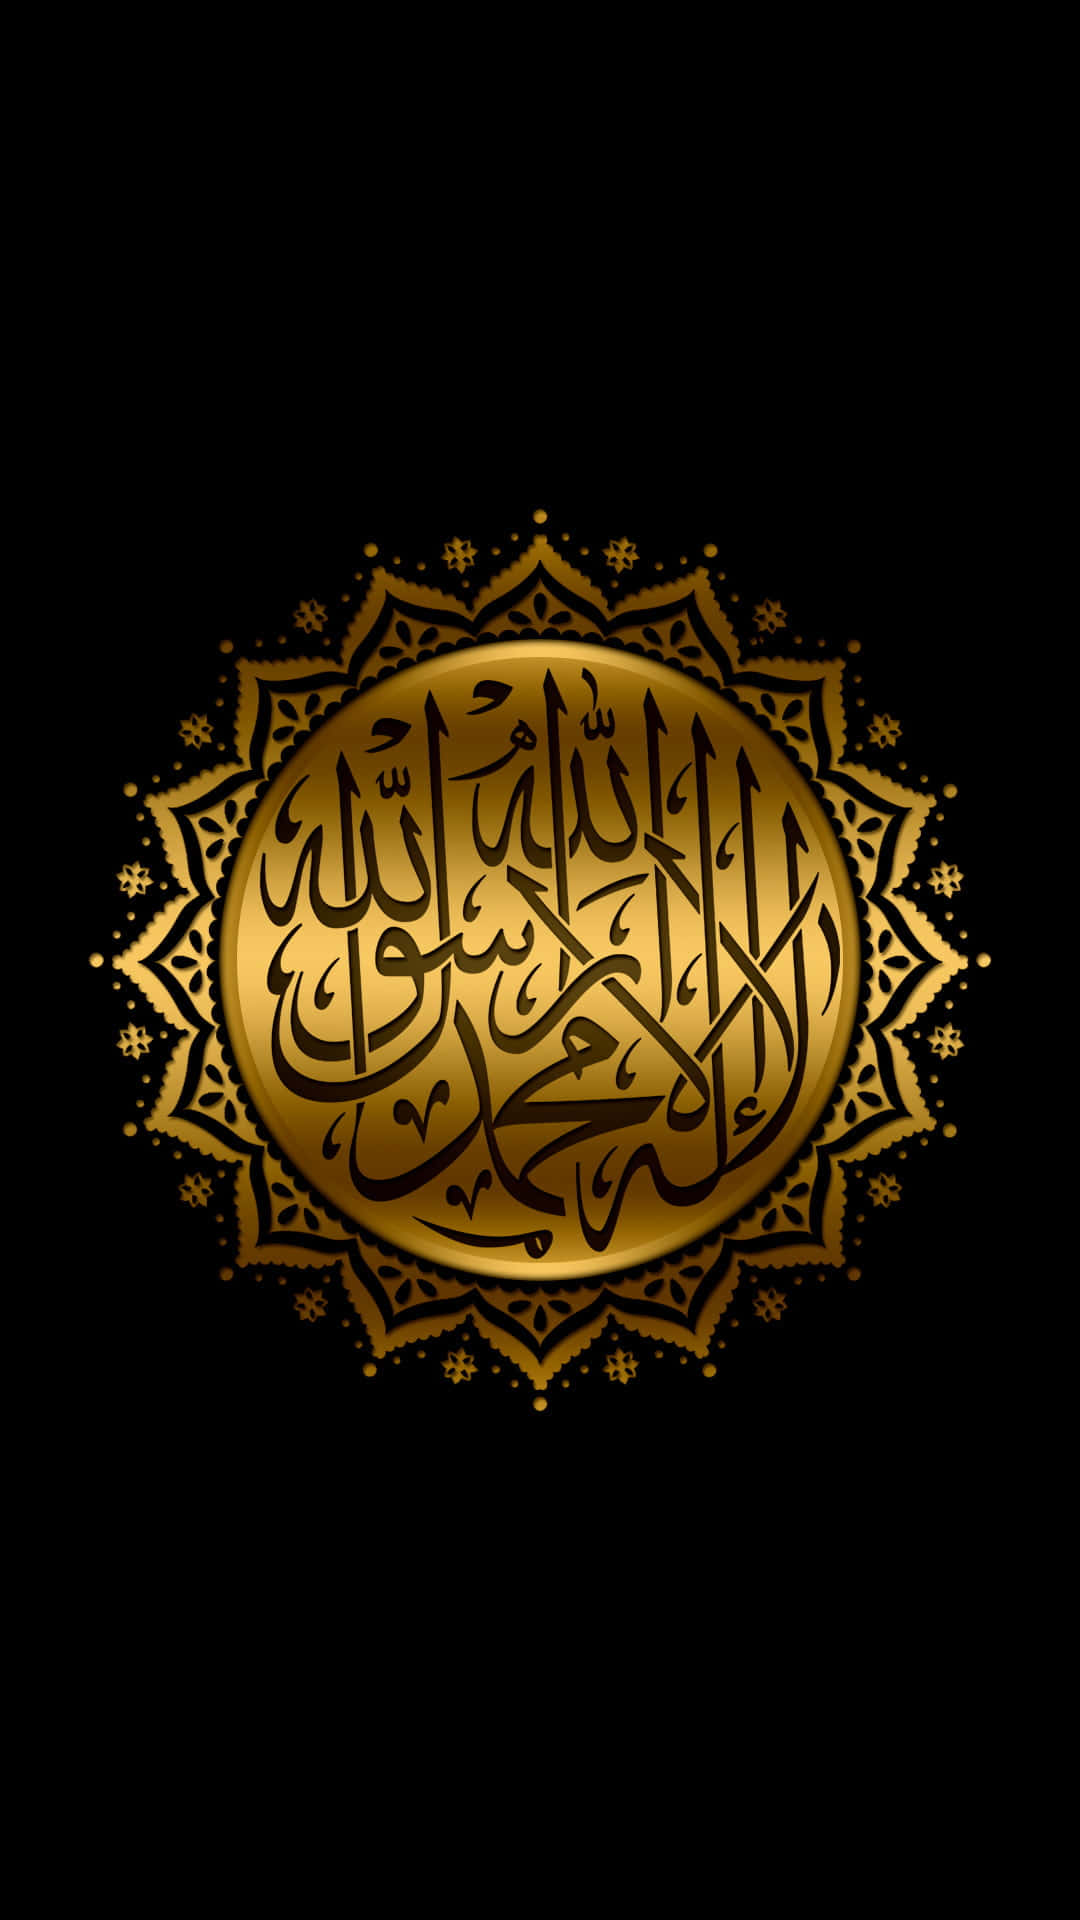 Islamic Calligraphy In Gold On Black Background